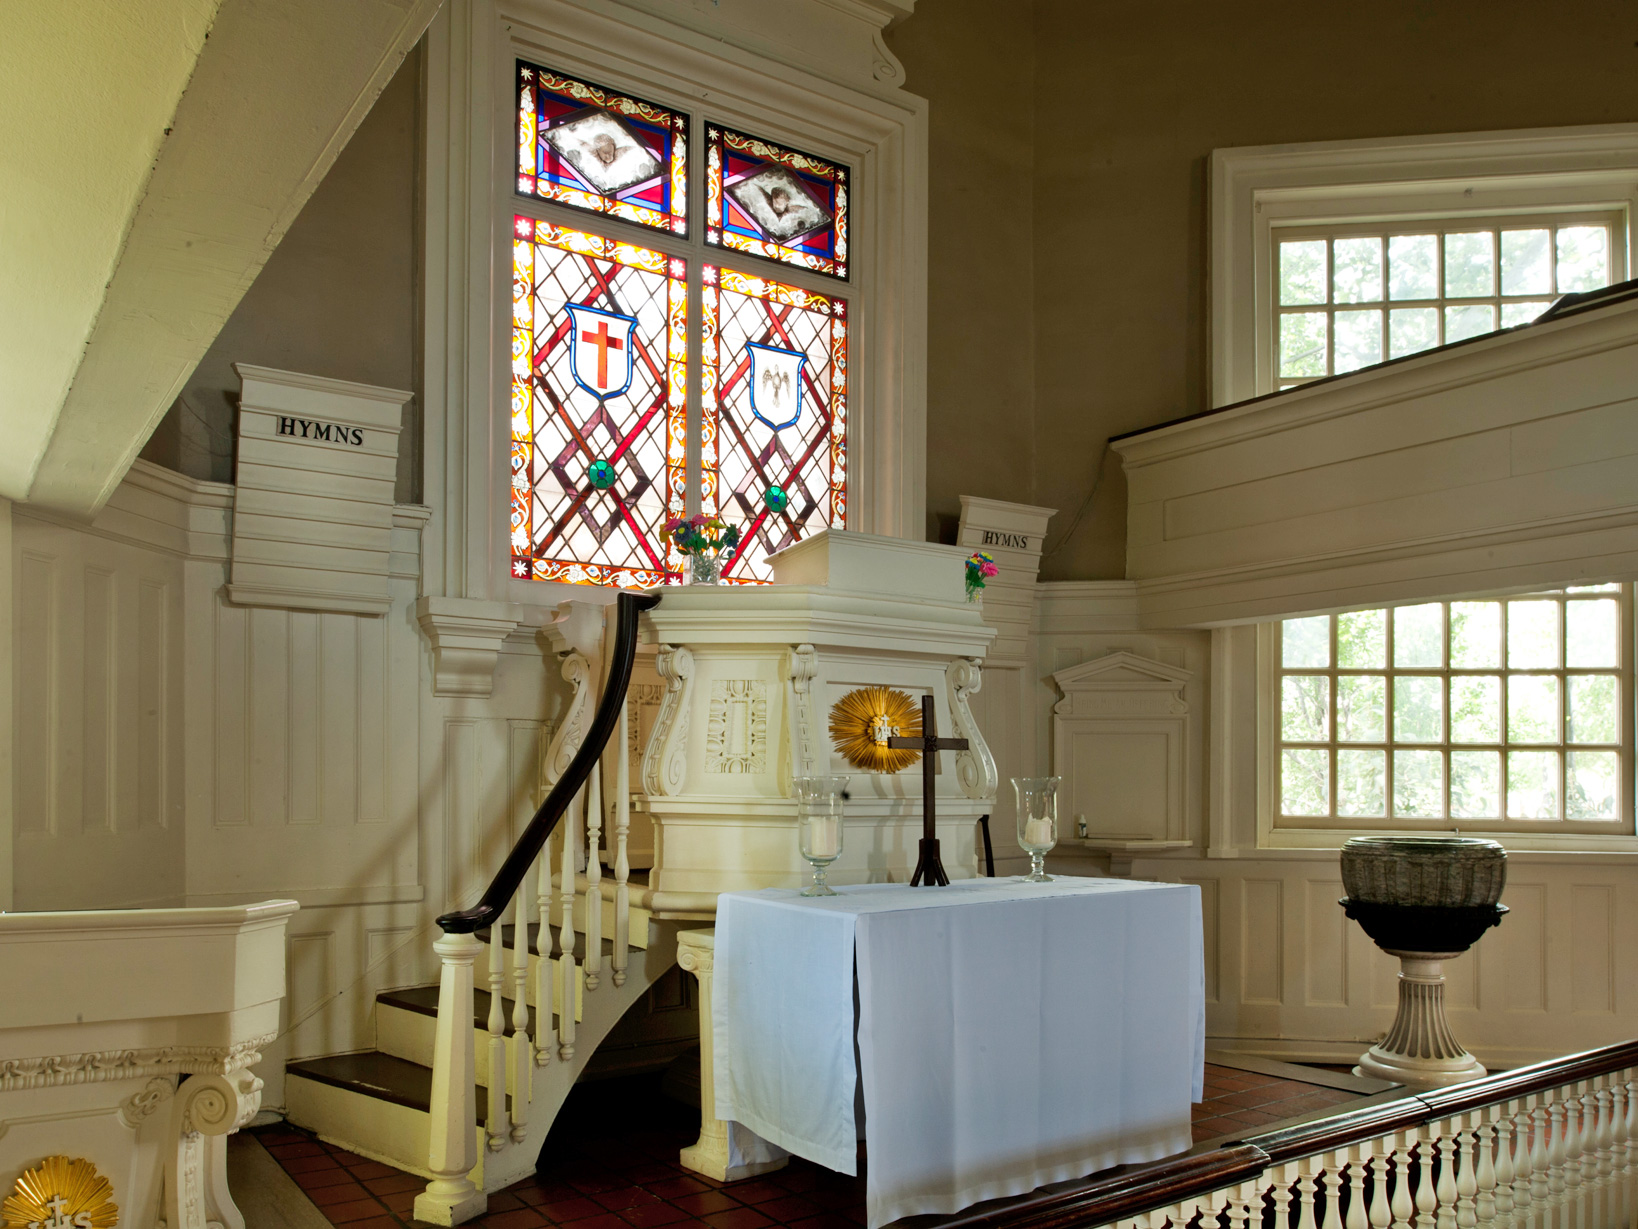 A color photo of the interior of Gloria Dei Church showing the pulpit and a stained glass window.